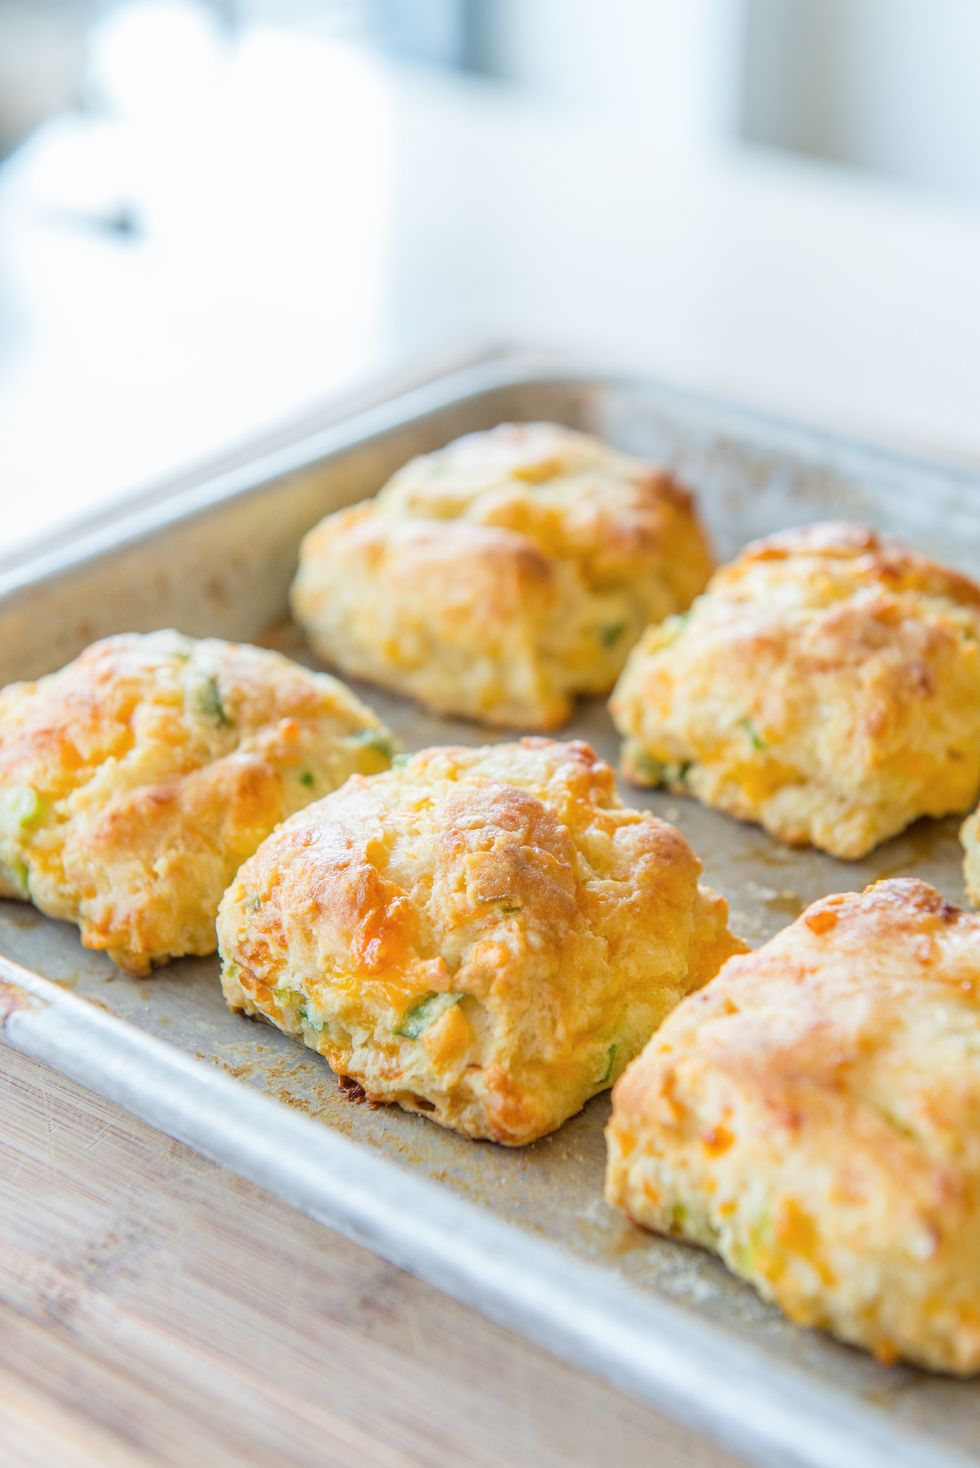 How to Freeze Biscuits